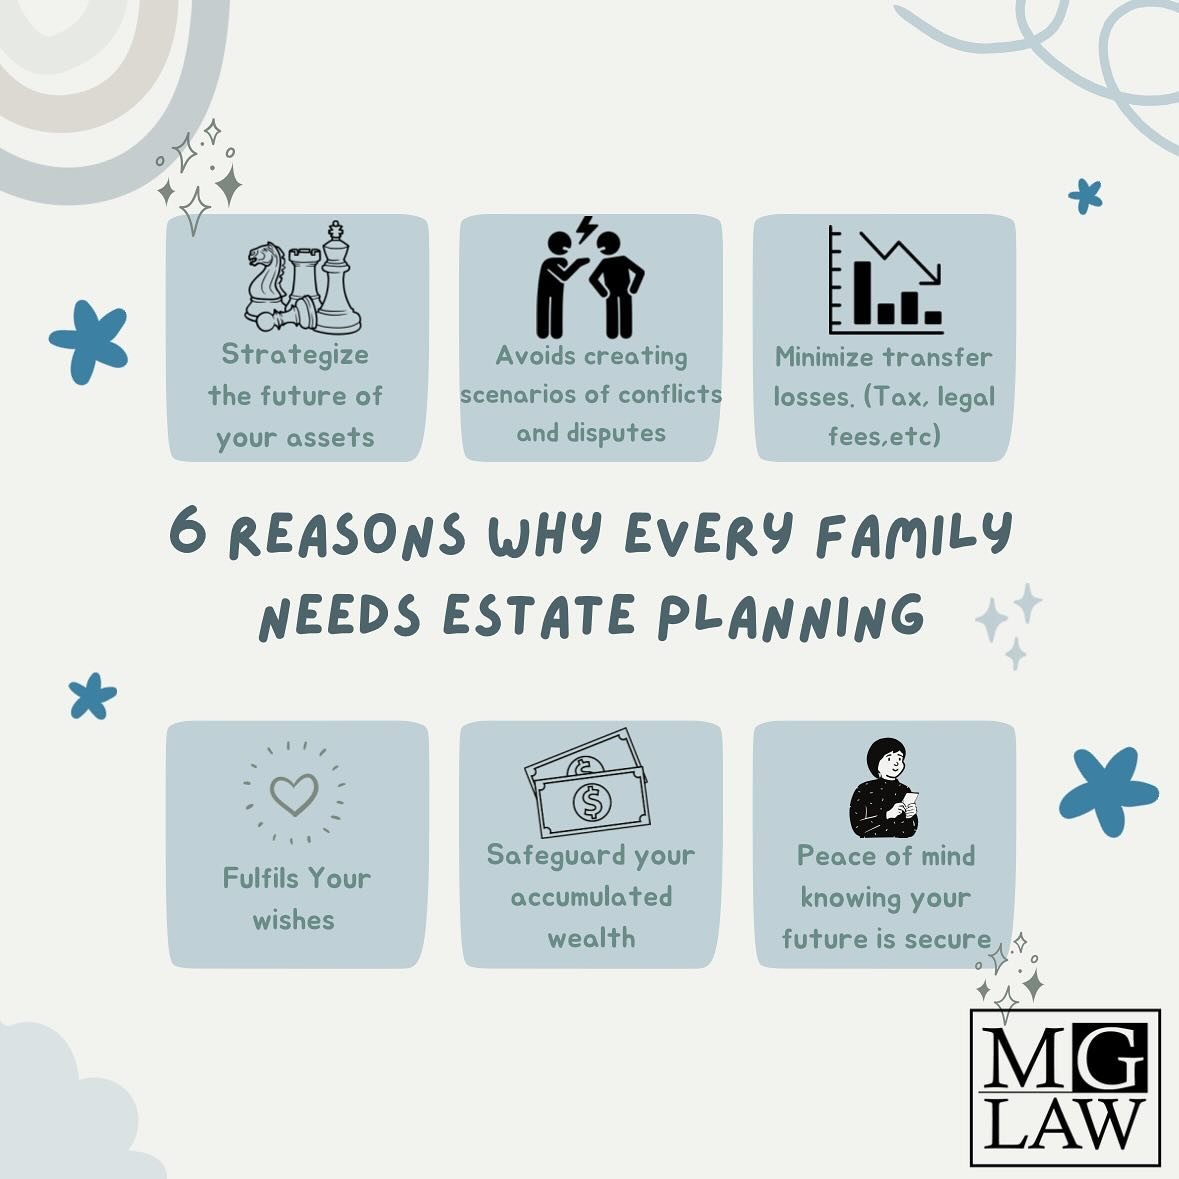 Secure your family&rsquo;s future with proper estate planning! Here are 6 reasons why it&rsquo;s a must for every family. 🏡💼 #EstatePlanning #FamilyFirst #LegacyBuilding #californiaestateplanning&nbsp;#coloradoestateplanning&nbsp;#floridaestateplan